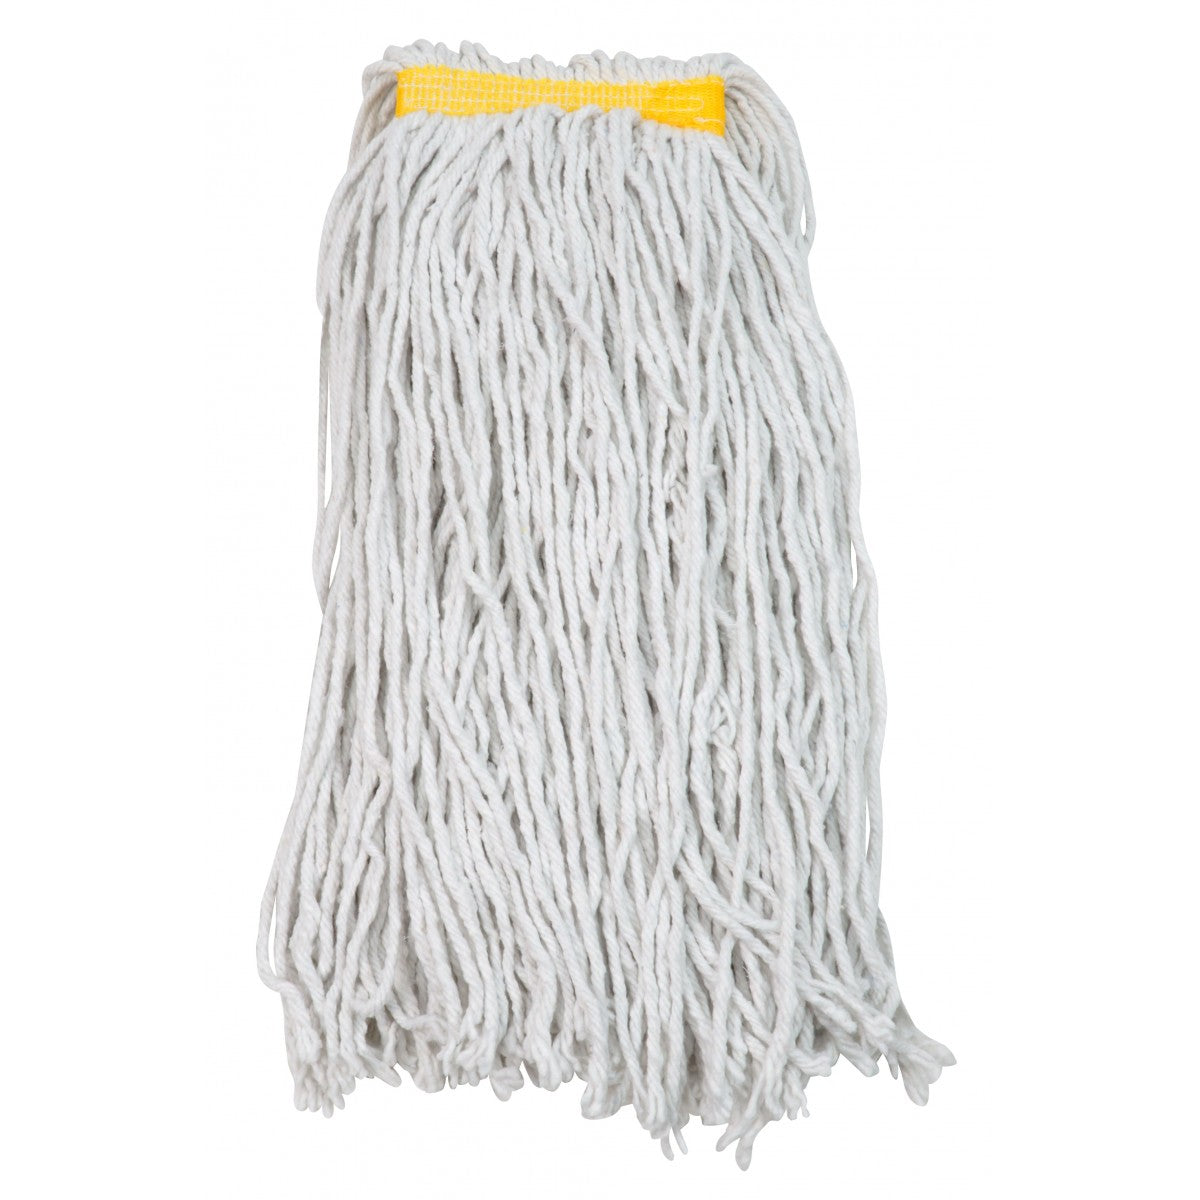 Replacement Synthetic Mop/Mop Head - (16 oz) - White 